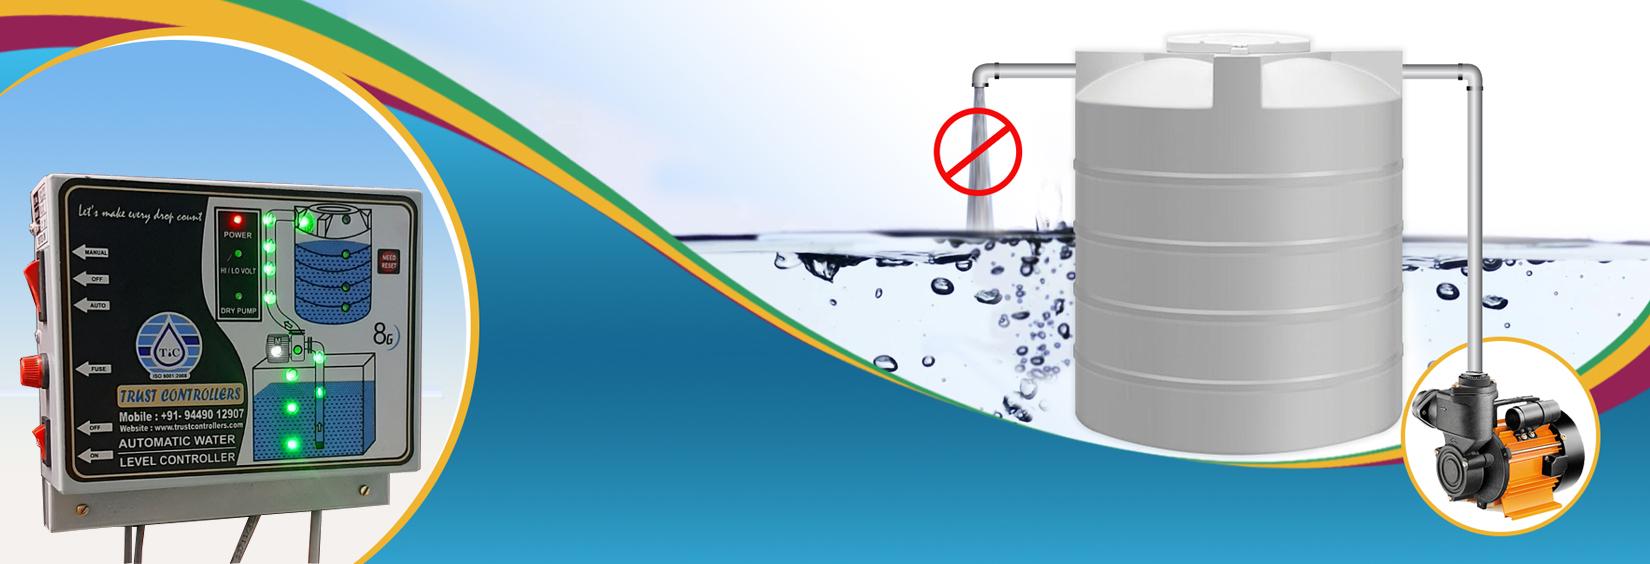 ban1 1 right brand of automatic water level controller,best and most reliable water level controller,automatic water level controller services in bamngalore,automatic water level controller manufacturers,wireless water level controller manufactureres in india